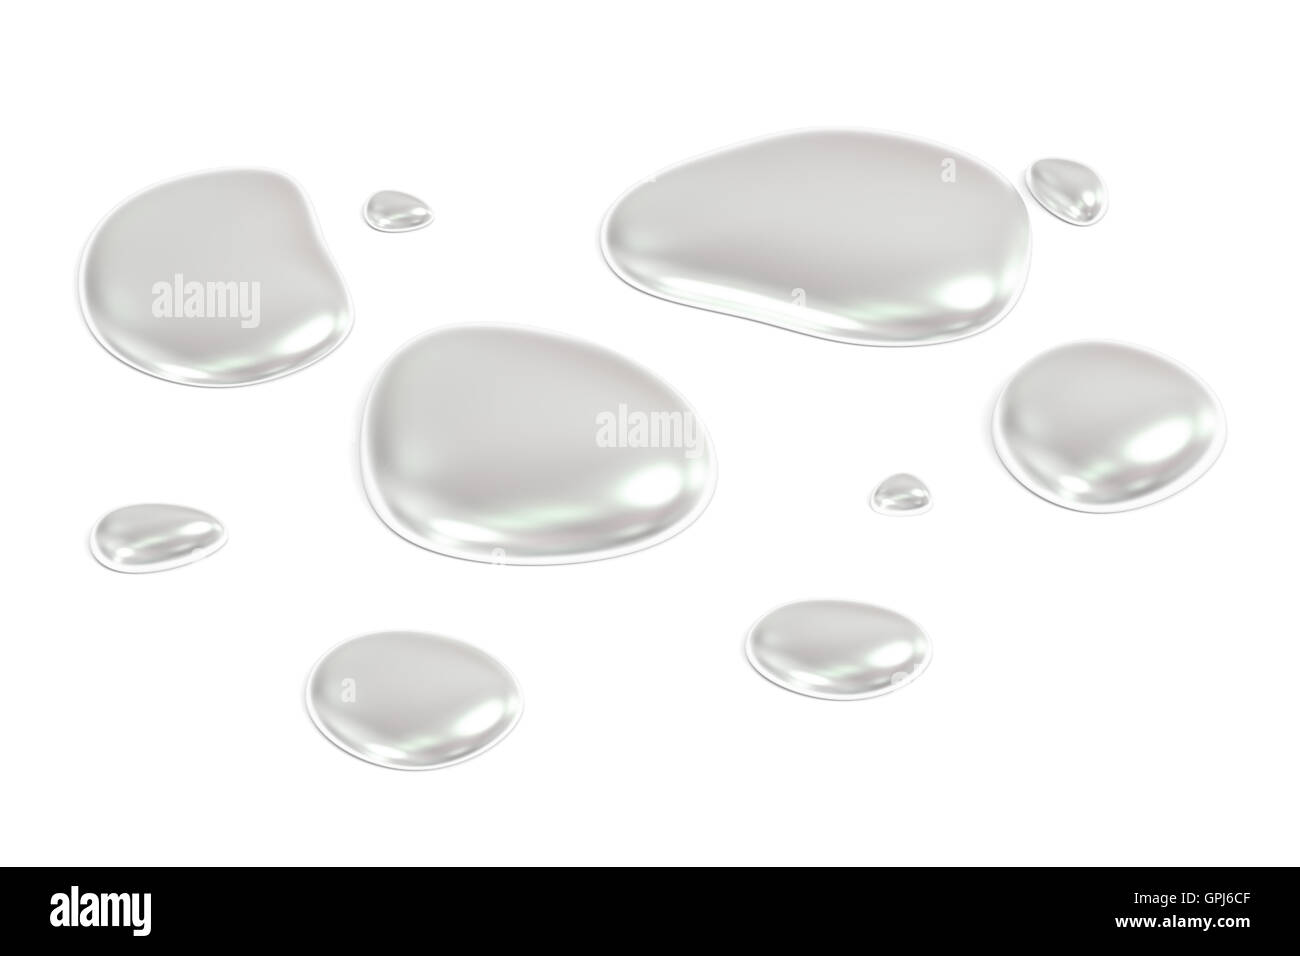 Mercury drops, 3D rendering  isolated on white background Stock Photo